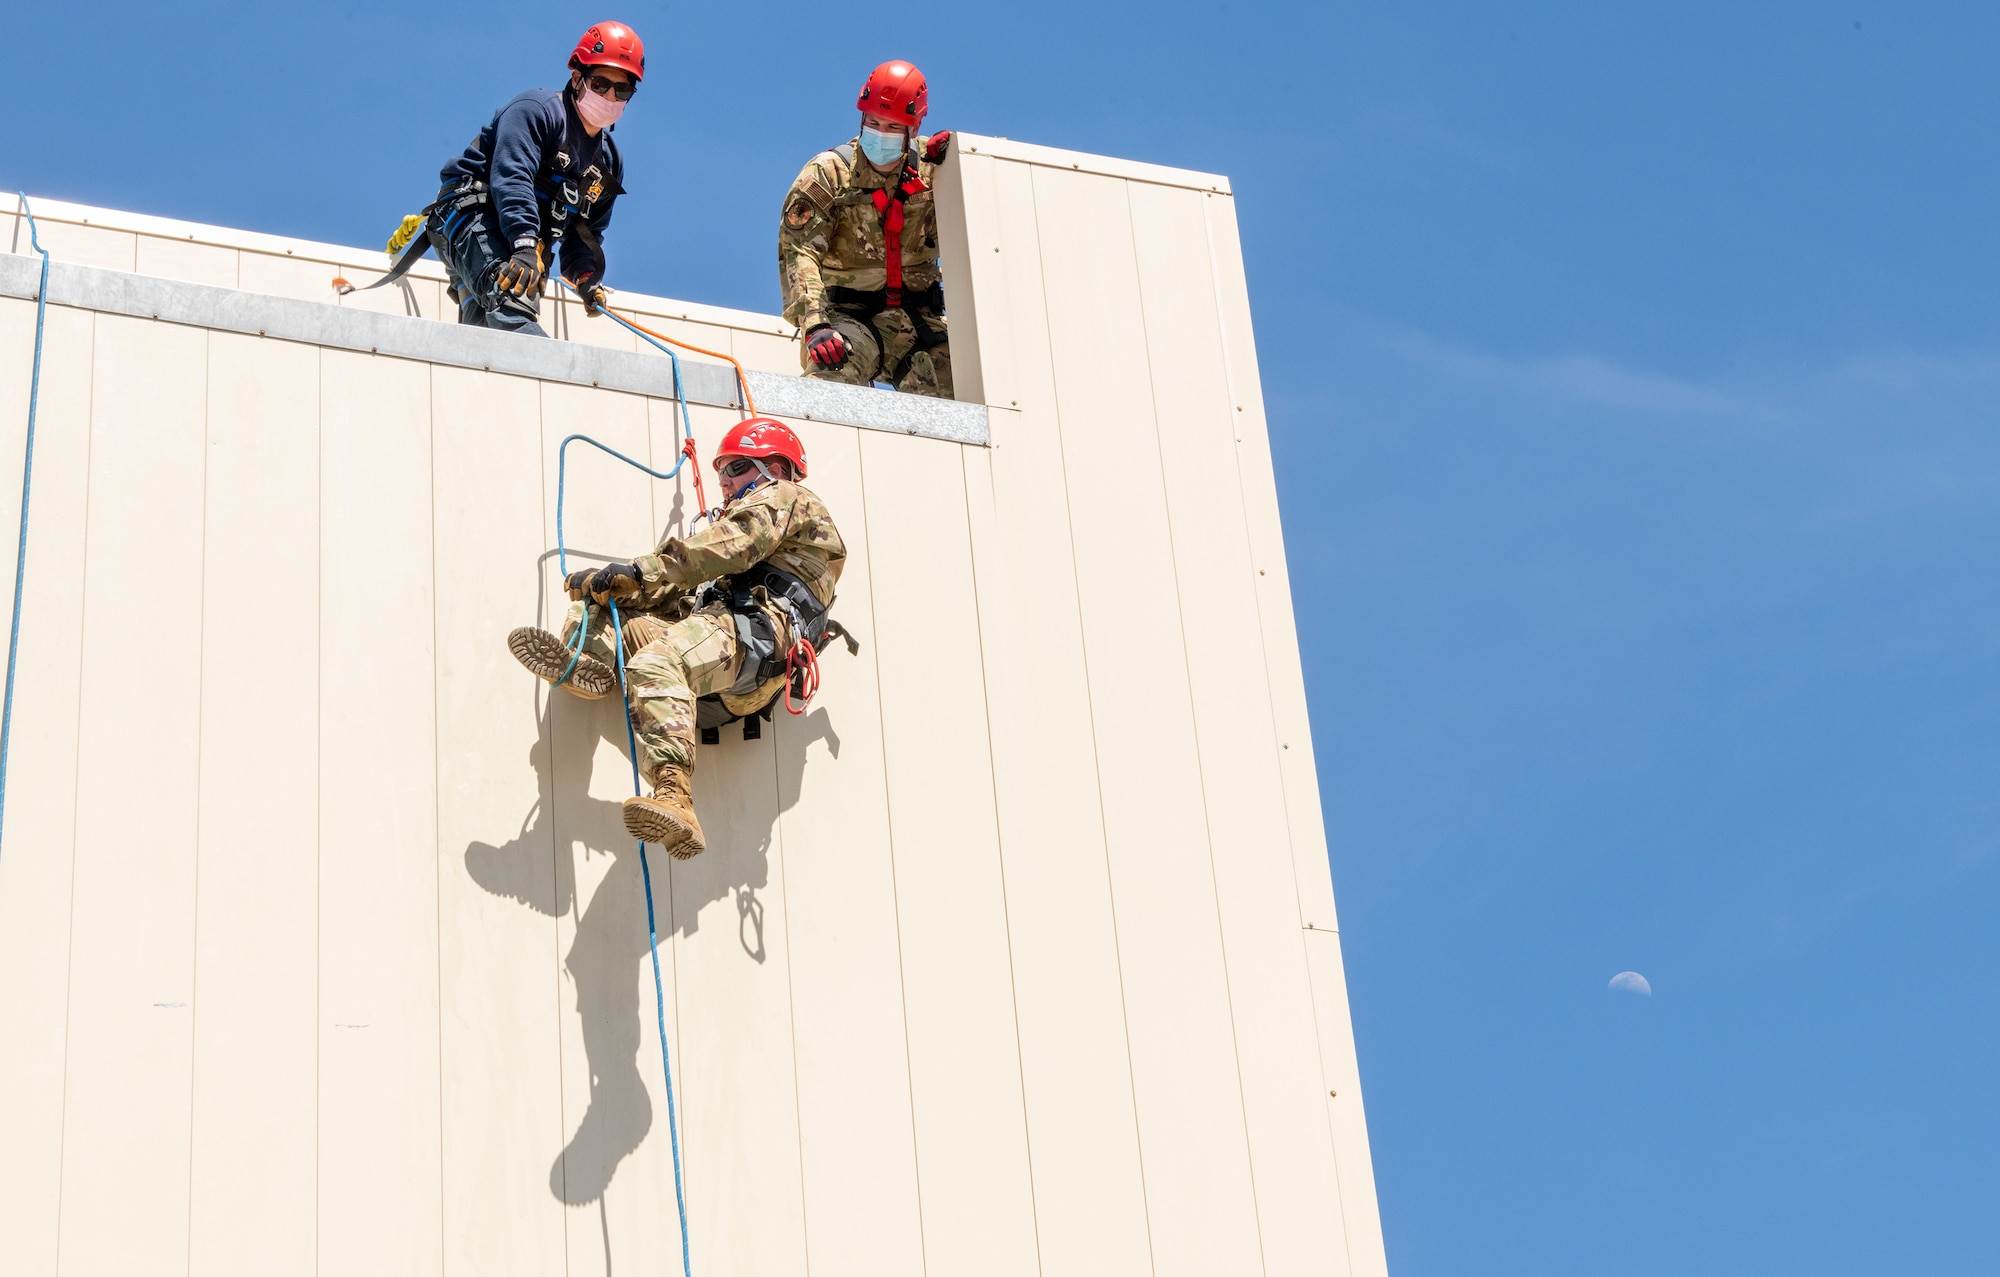 Ricardo Campos, left, and U.S. Air Force Staff Sgt. Justin Rice, 60th Civil Engineer Squadron lead fire fighters, watch as Tech Sgt. Christopher Klingelhoets, 60th CES fire protection crew chief, ascend a structure April 19, 2021, at the Travis Fire and Emergency Services training facility at Travis Air Force Base, California. The training demonstration provided senior leadership with a clear picture of the technical rescue capabilities for multi-story building and confined space rescues conducted by Travis AFB emergency response personnel. (U.S. Air Force photo by Heide Couch)